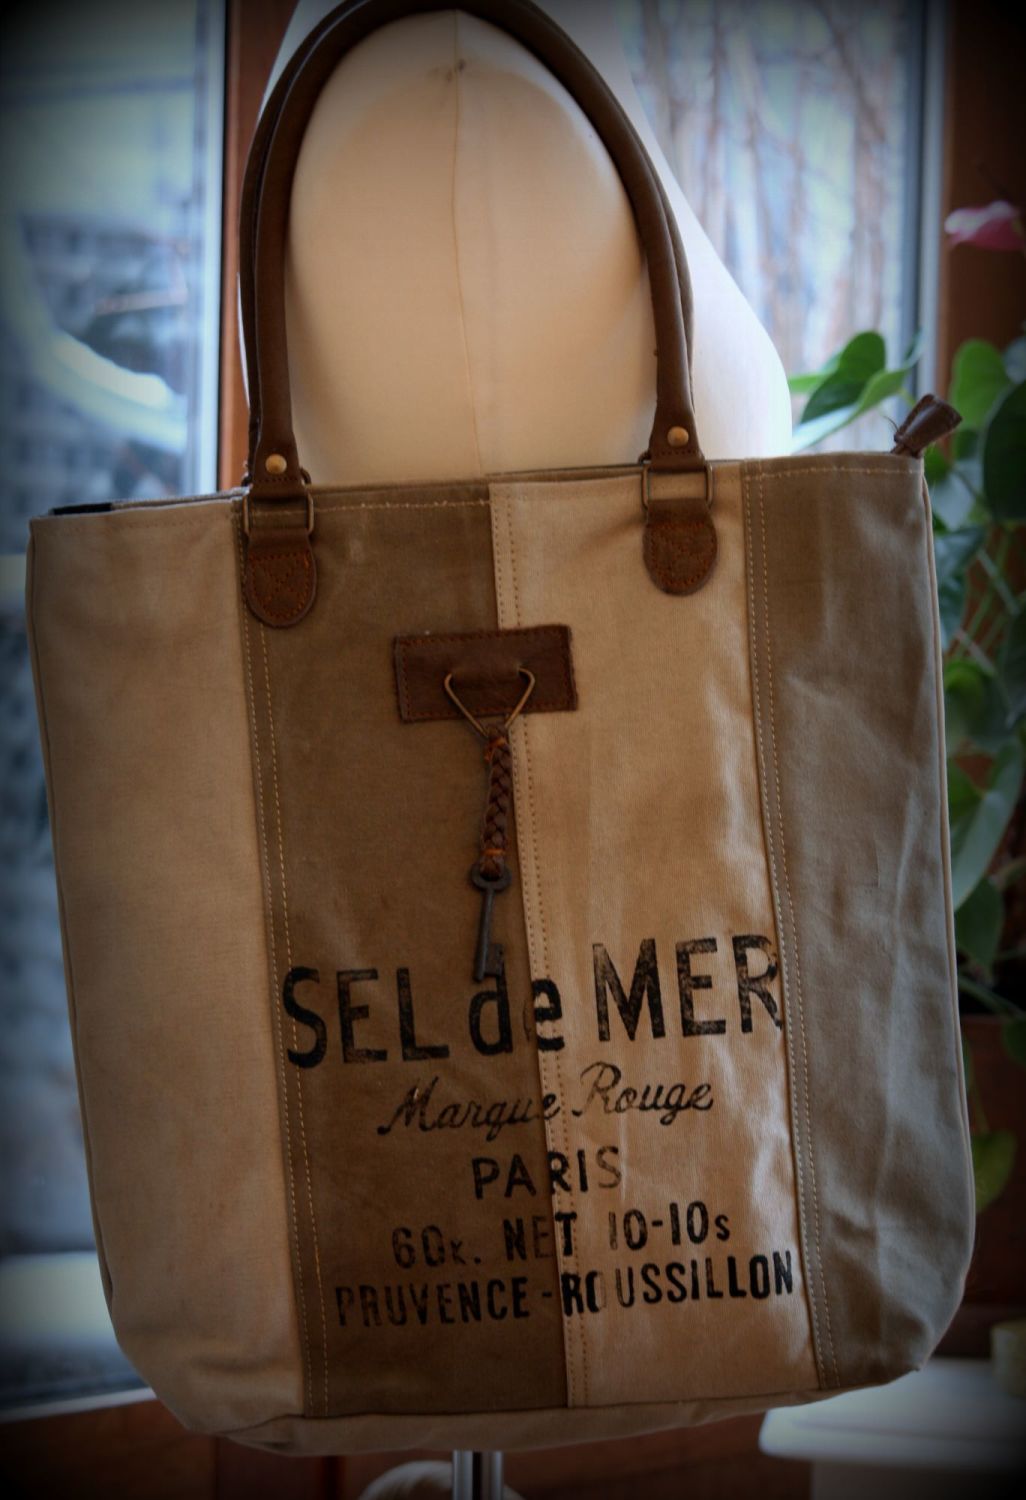 Vintage French Tote Bag